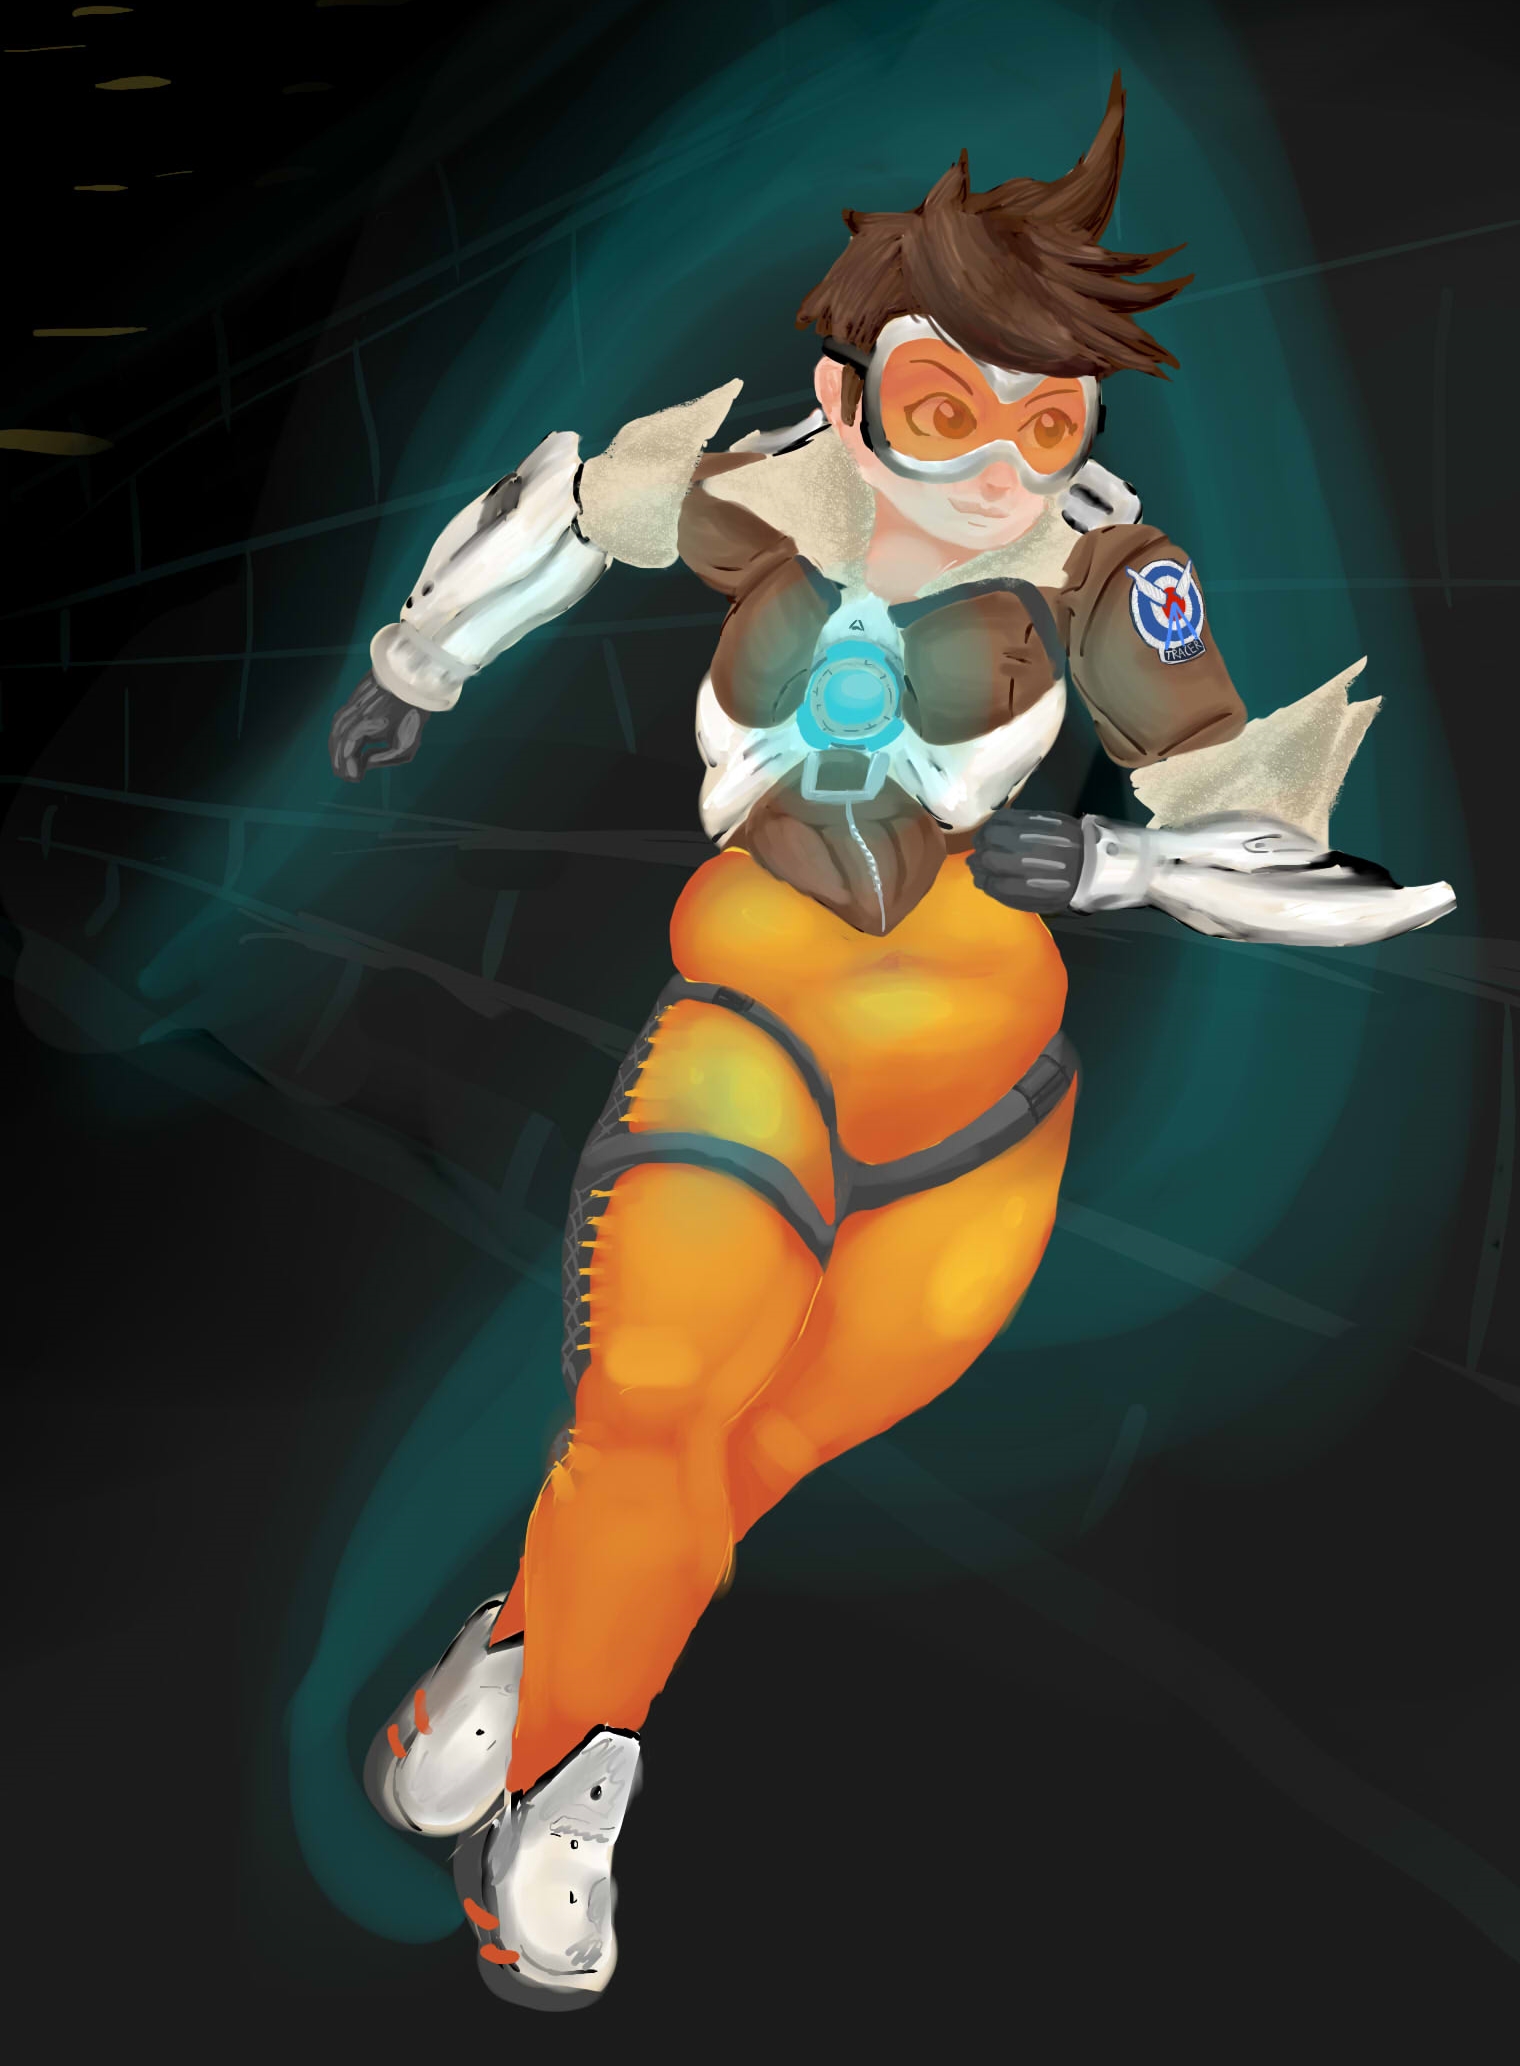 Tracer By Disconcere On DeviantArt.